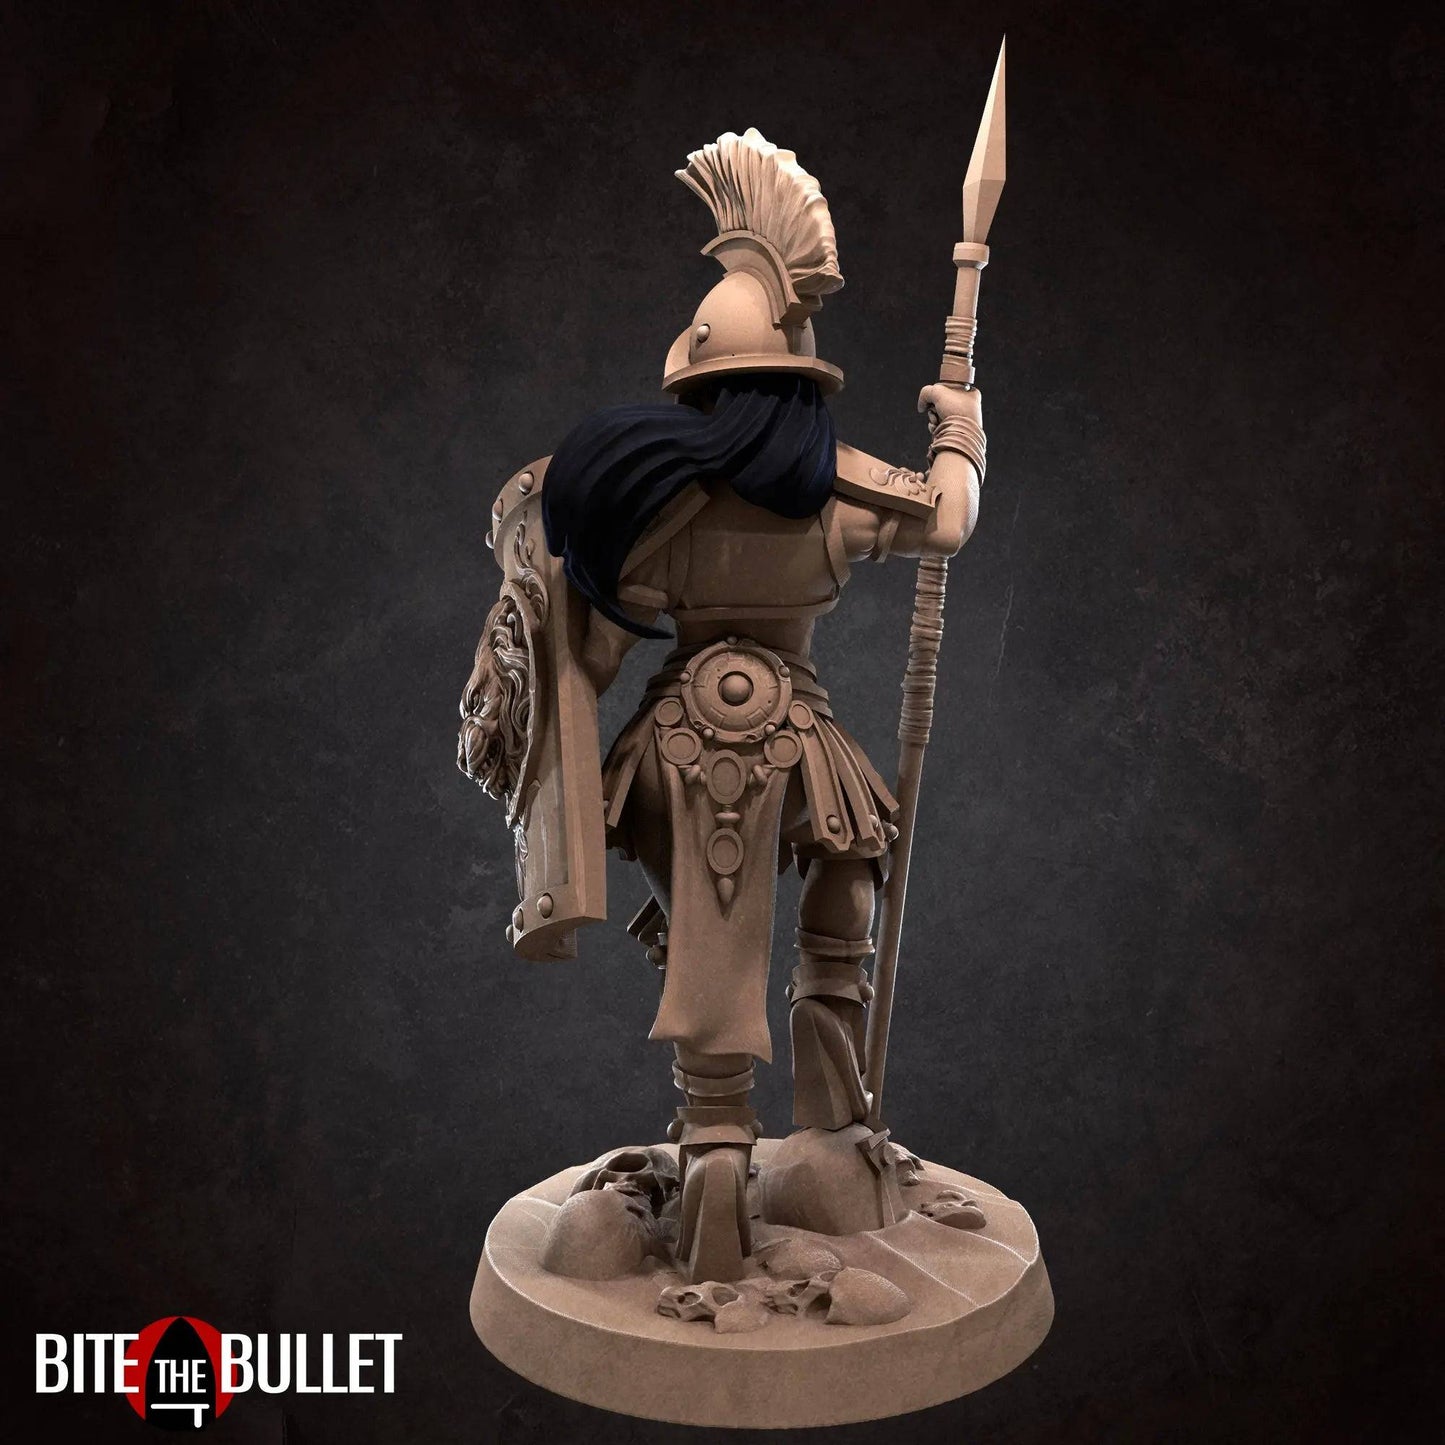 Kalista, Pinup SFW NSFW Lovely Woman, Gladiator Greek Spartan Soldier | D&D Miniature Pinup | Bite the Bullet - Tattles Told 3D